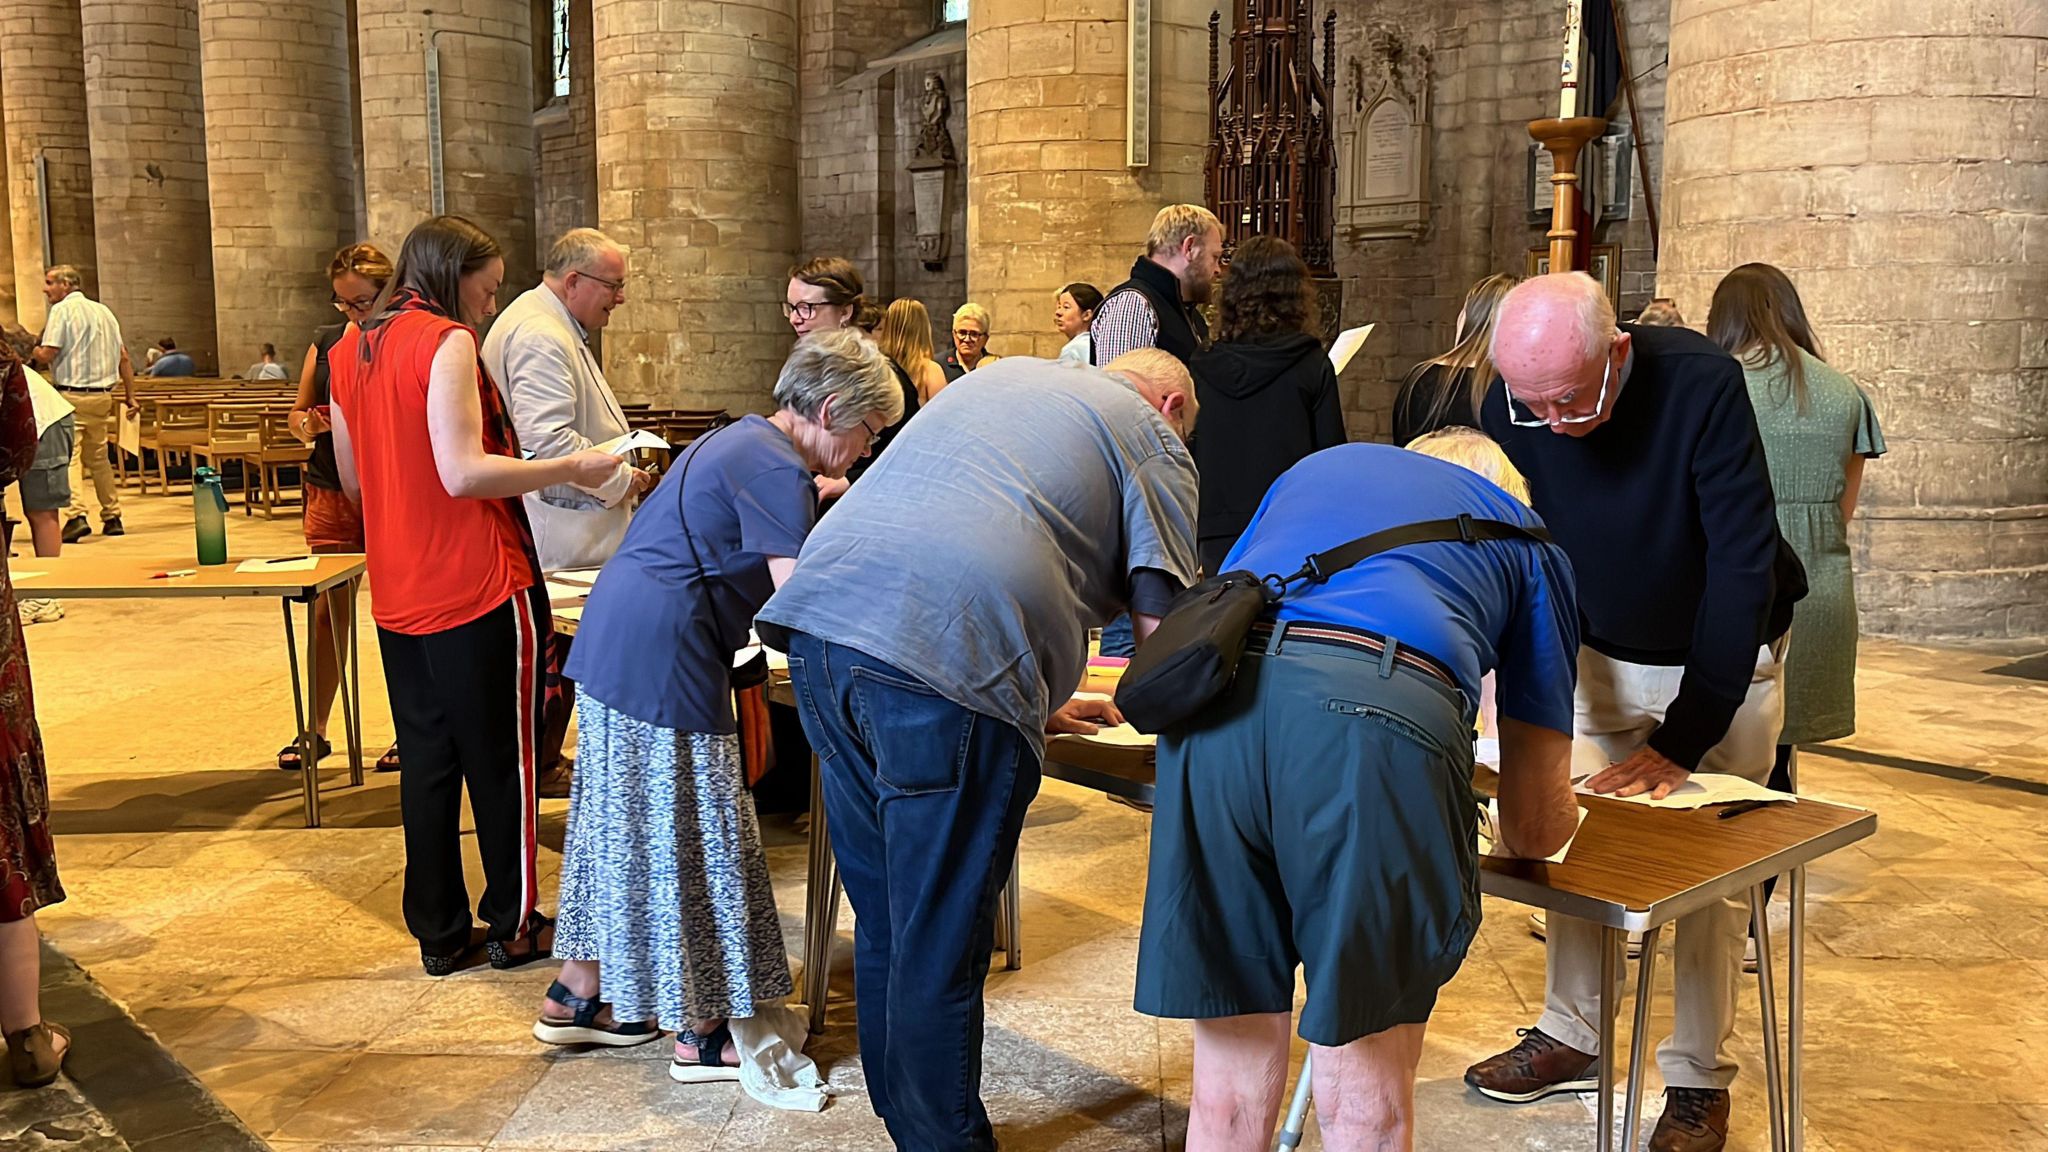 People stood around a table inside Tewkesbury Abbey writing their questions on pieces of paper.